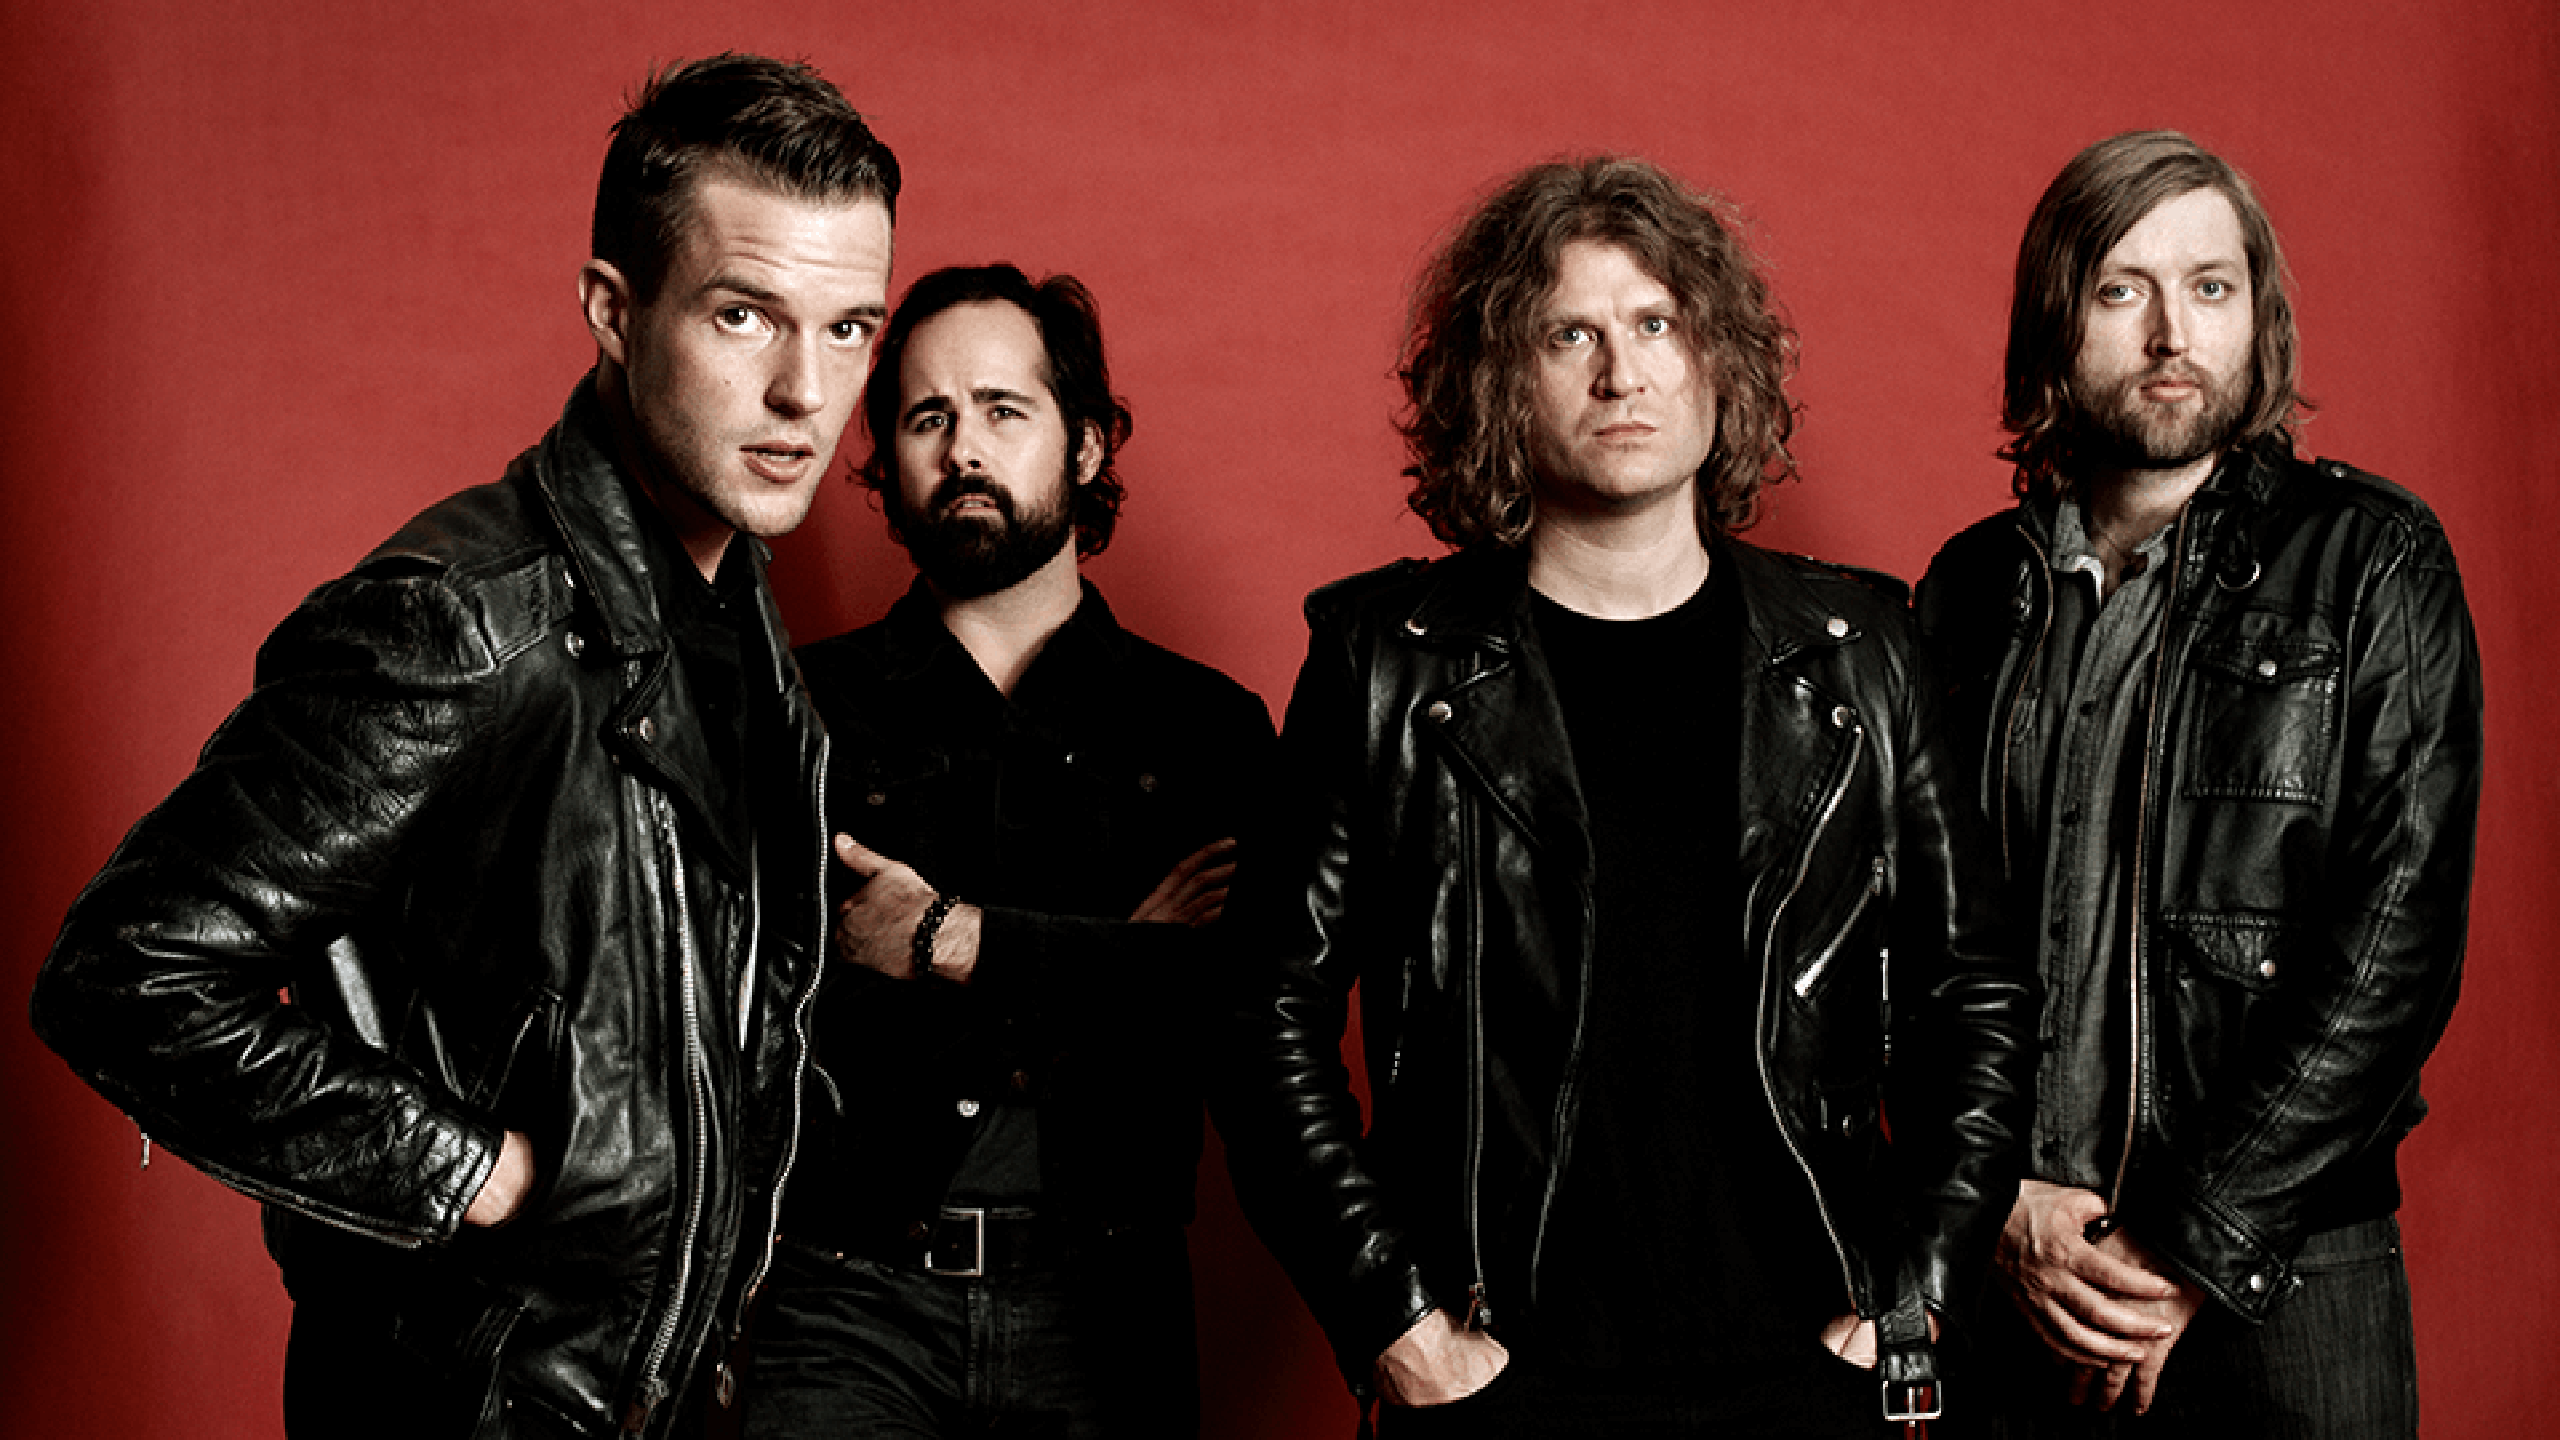 The Killers [POSTPONED] at Gorge Amphitheatre